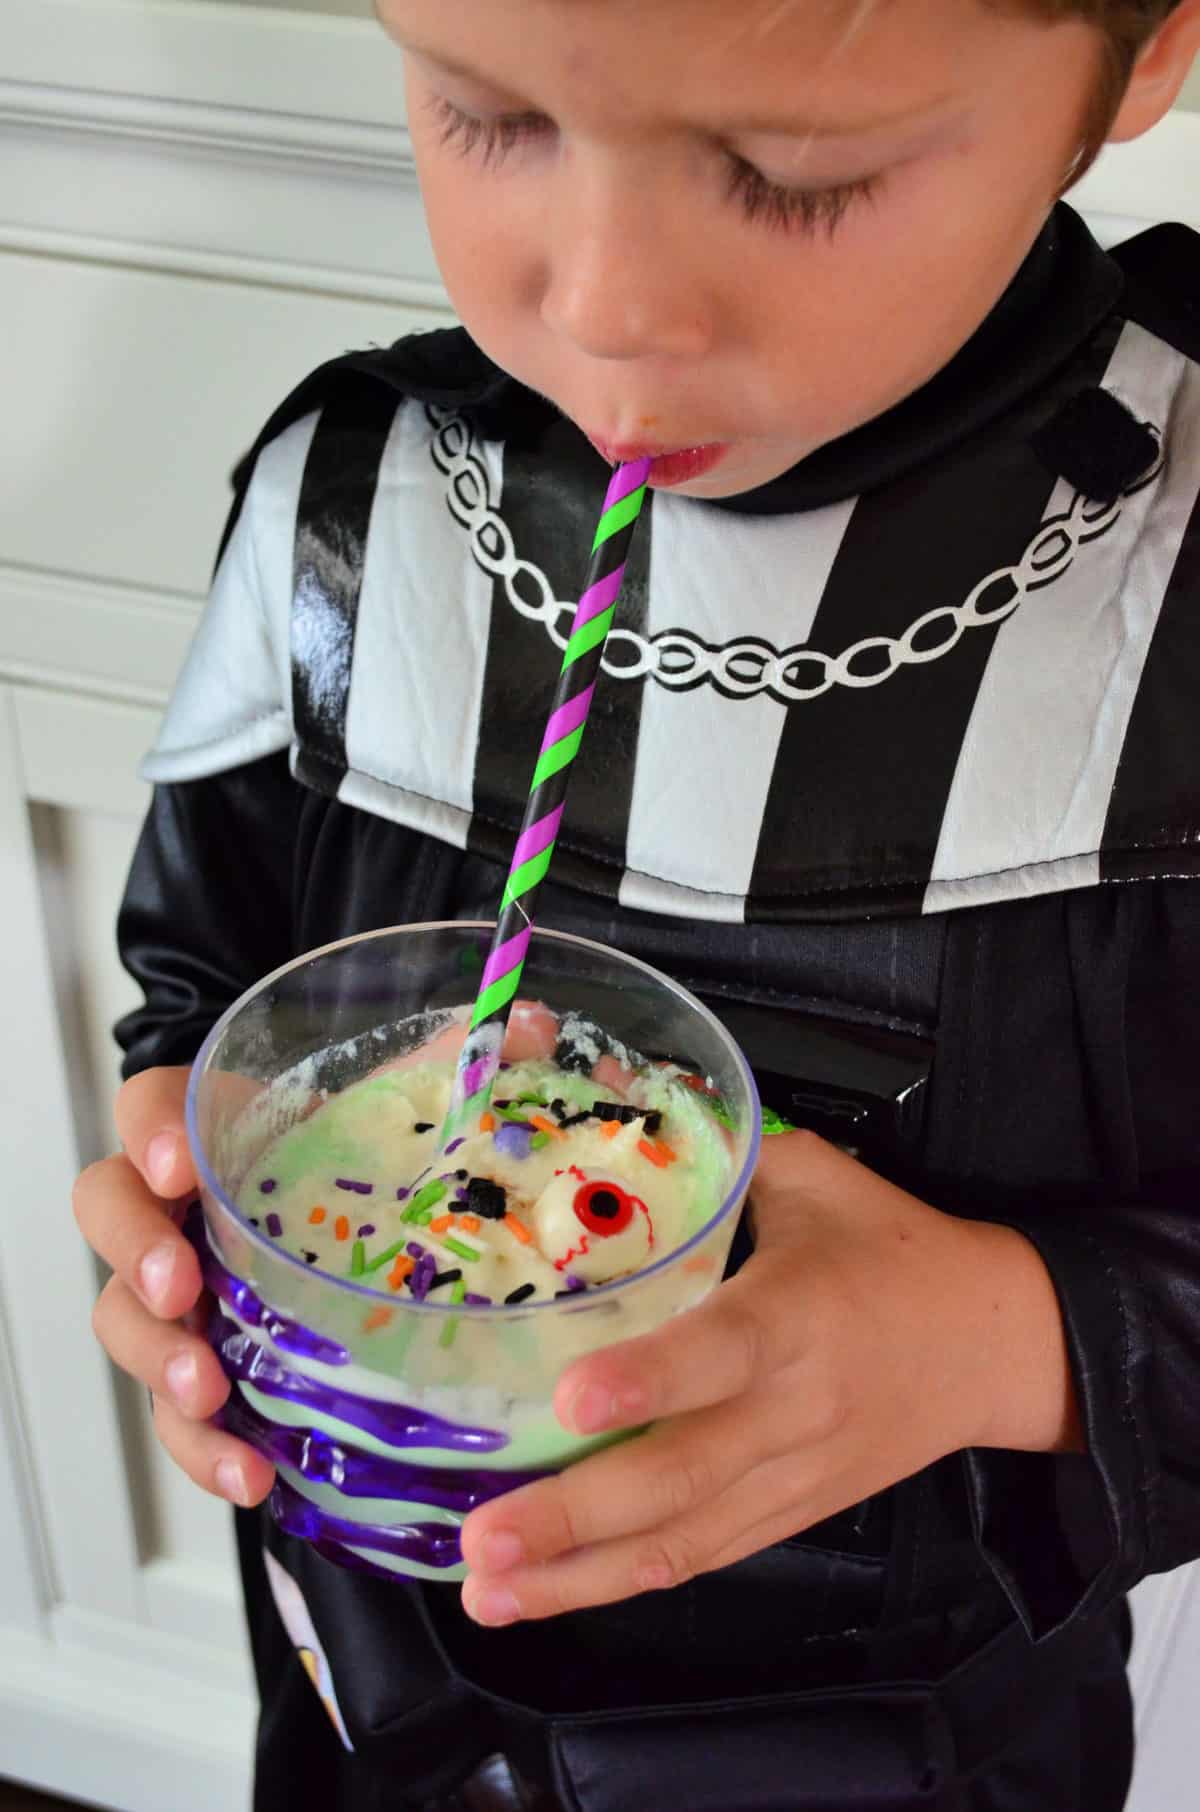 Costumed bow sipping green witch punch with candy eyeballs from paper straw.